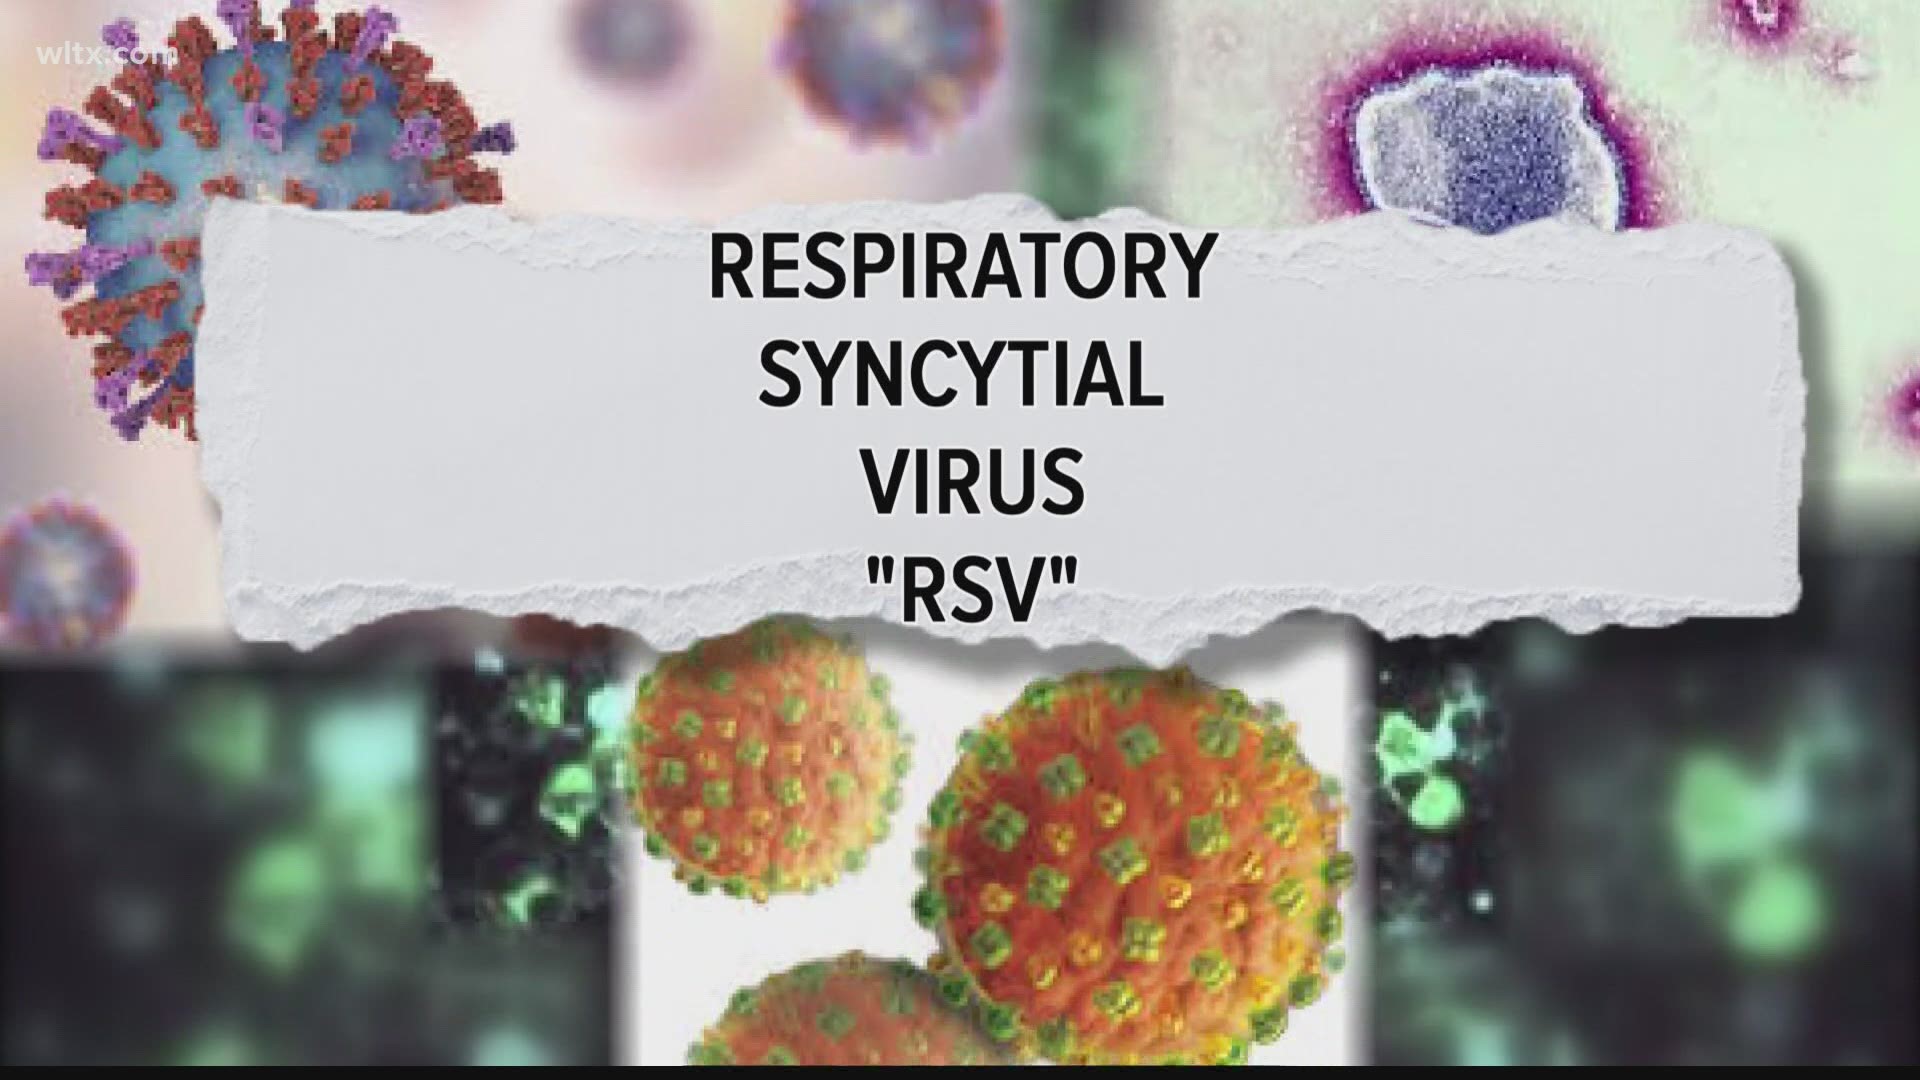 Respiratory Syncytial virus also known as RSV is on the rise in South Carolina and is most dangerous to older adults.